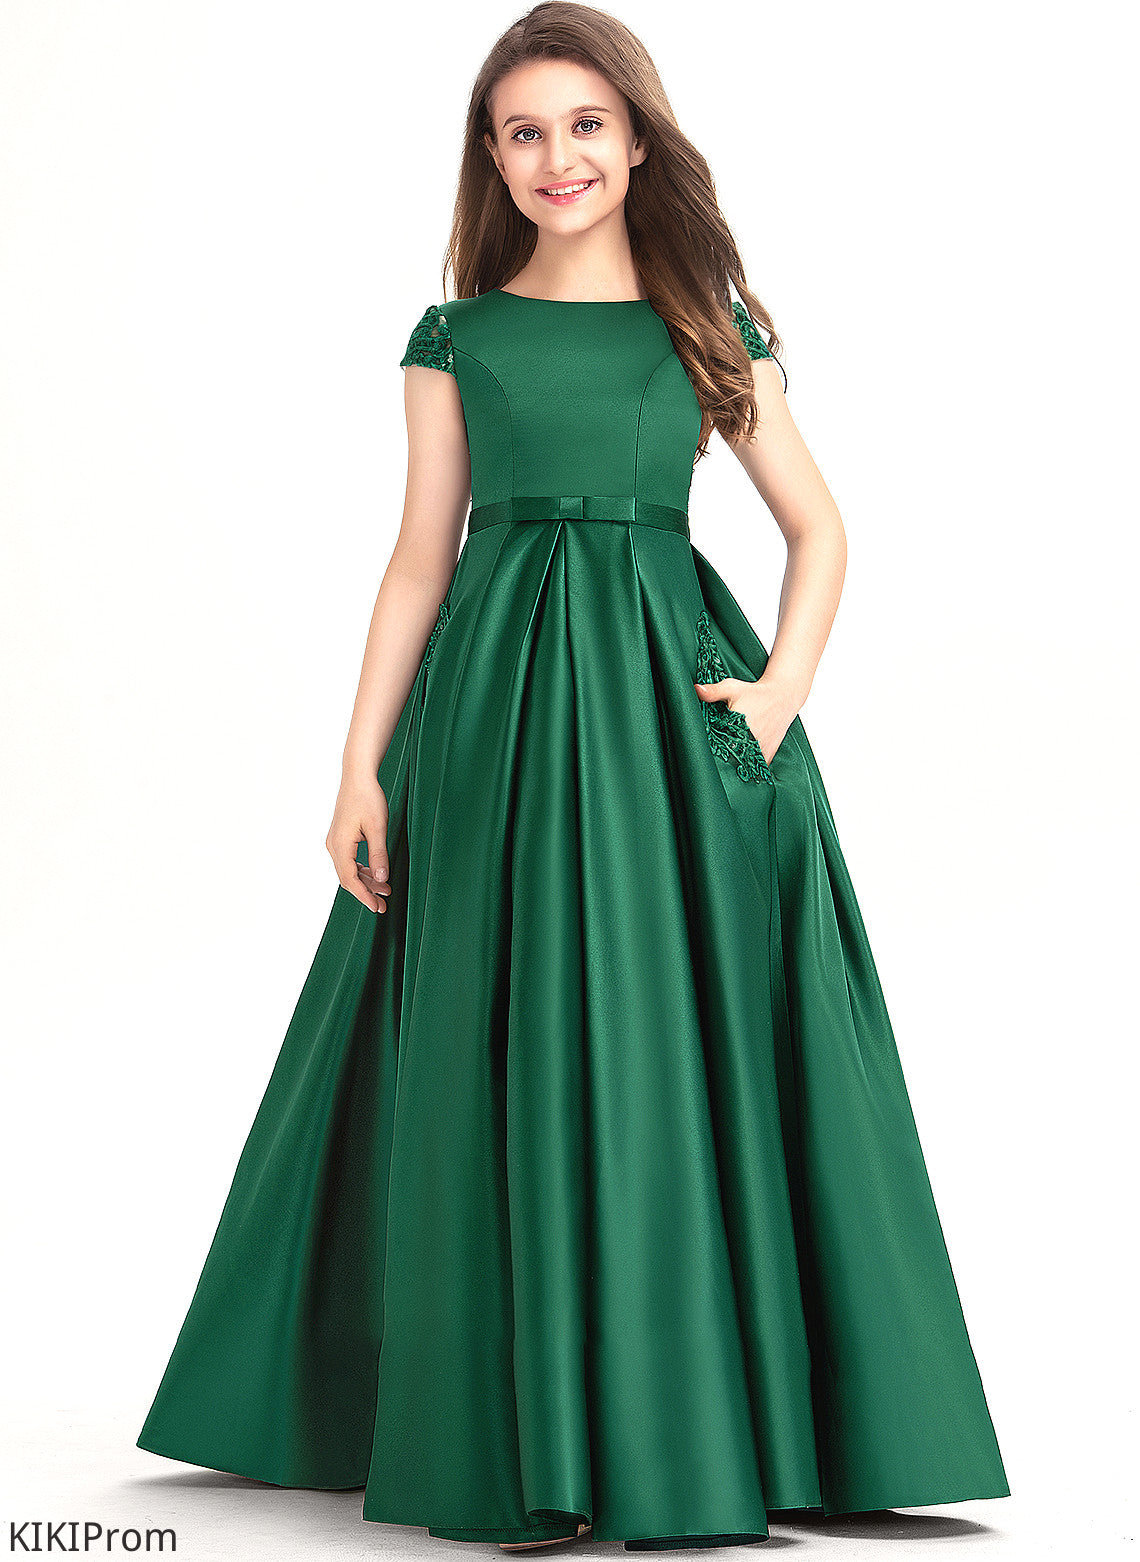 With Floor-Length Satin Ball-Gown/Princess Bow(s) Neck Scoop Pockets Junior Bridesmaid Dresses Kayla Lace